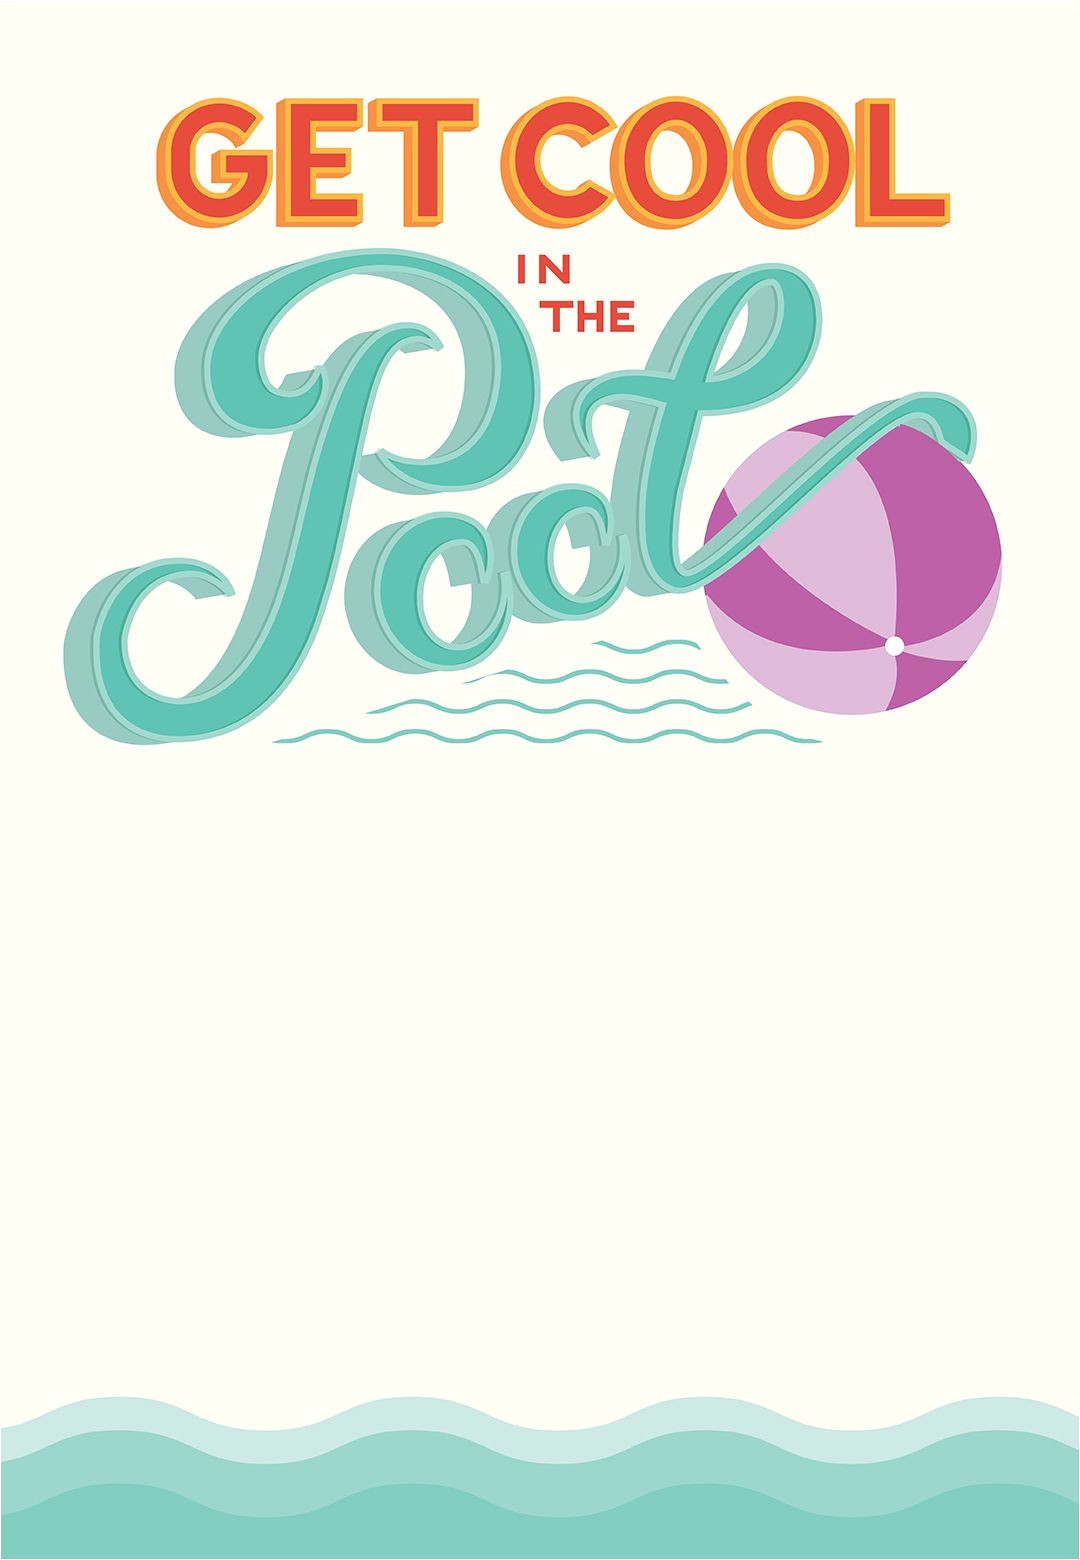 Pool Party Invitation Template Pool Party Free Printable Party Invitation Template